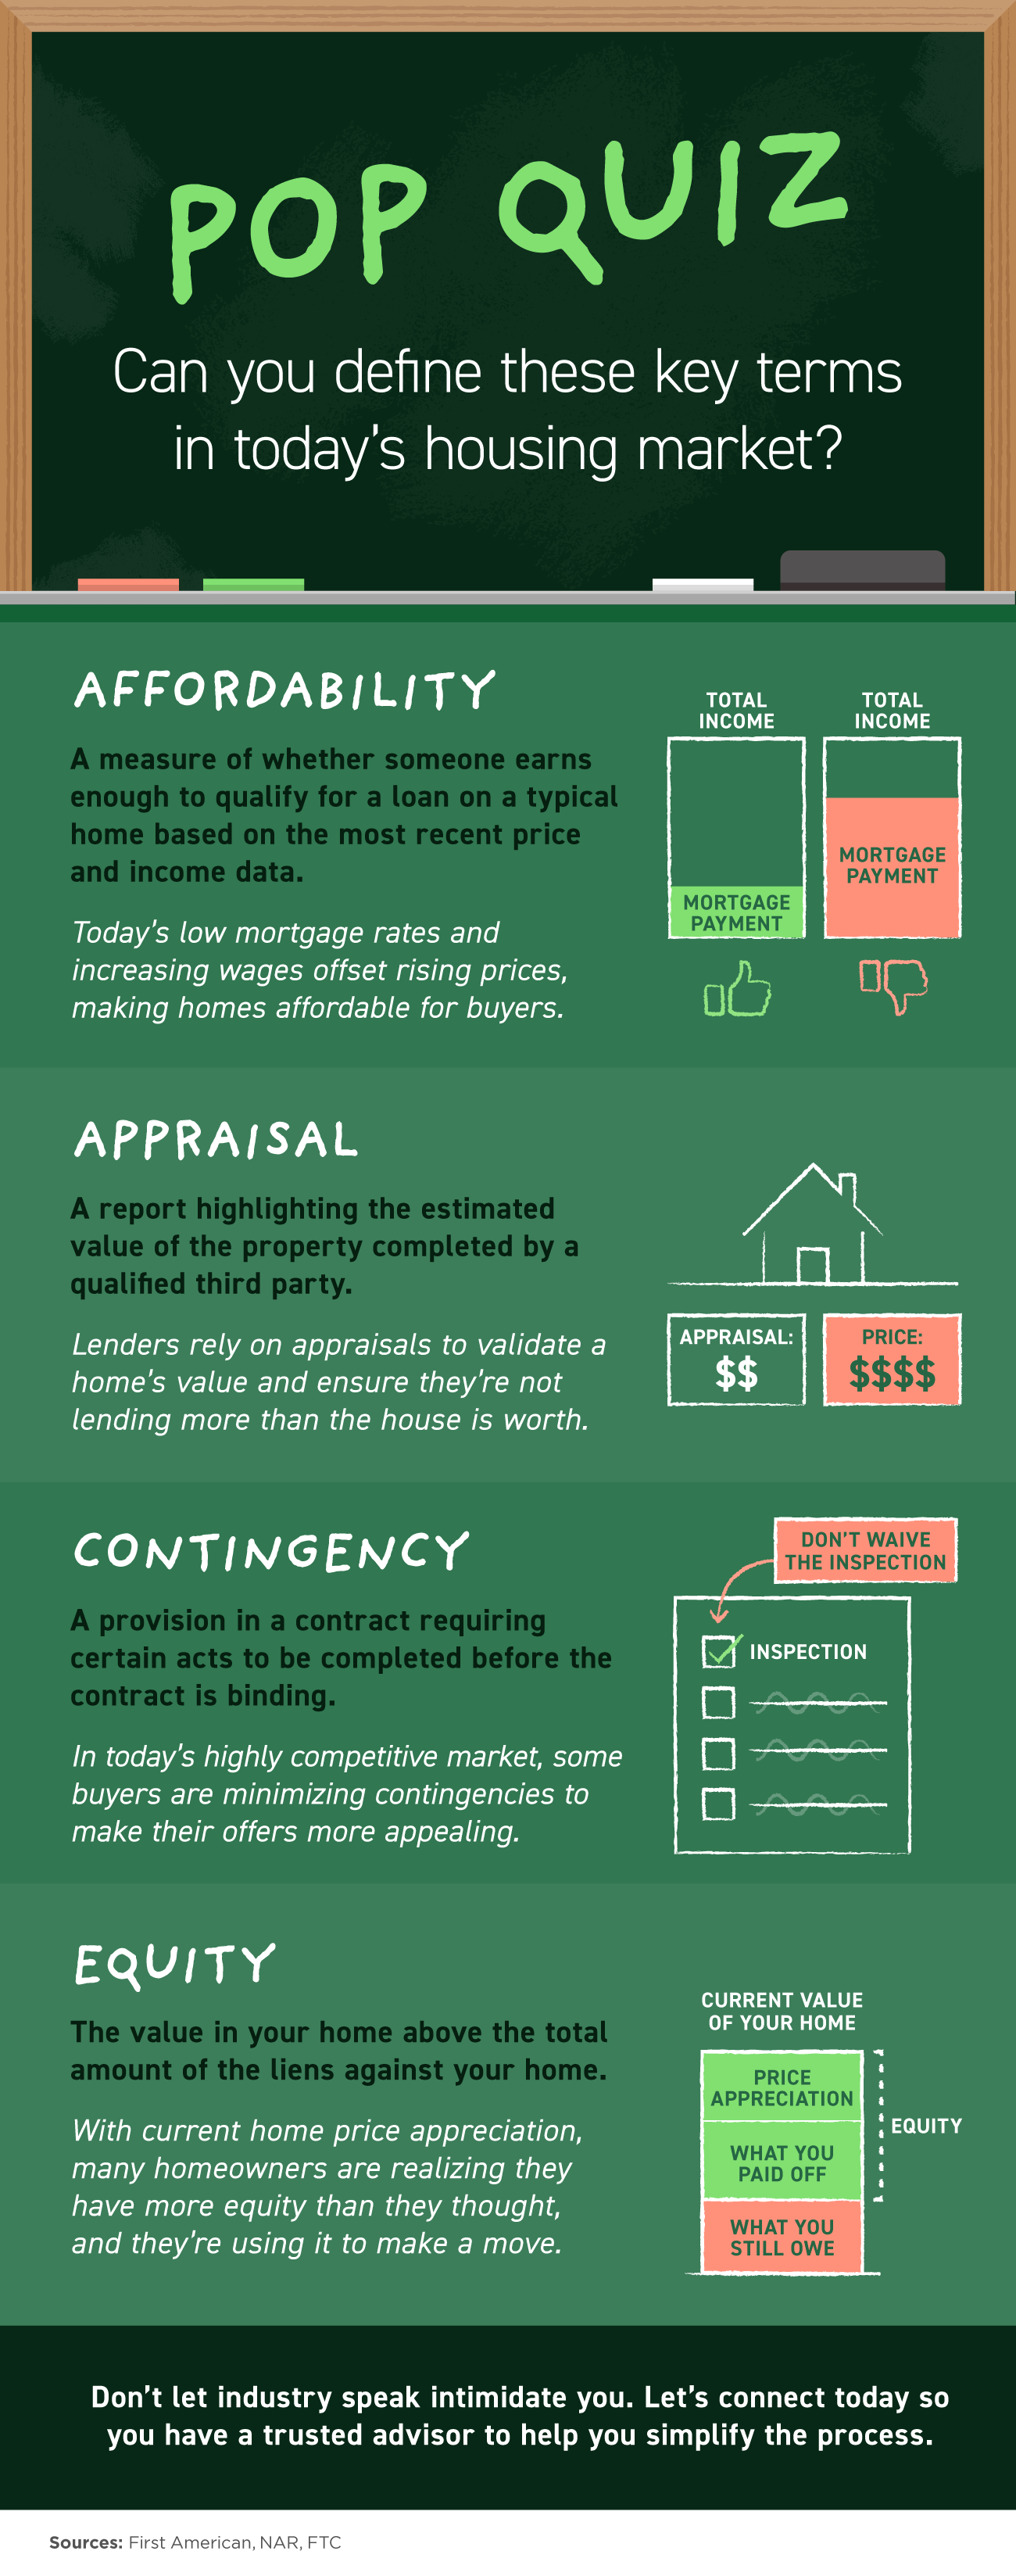 Pop Quiz: Can You Define These Key Terms in Today’s Housing Market? [INFOGRAPHIC] | Simplifying The Market